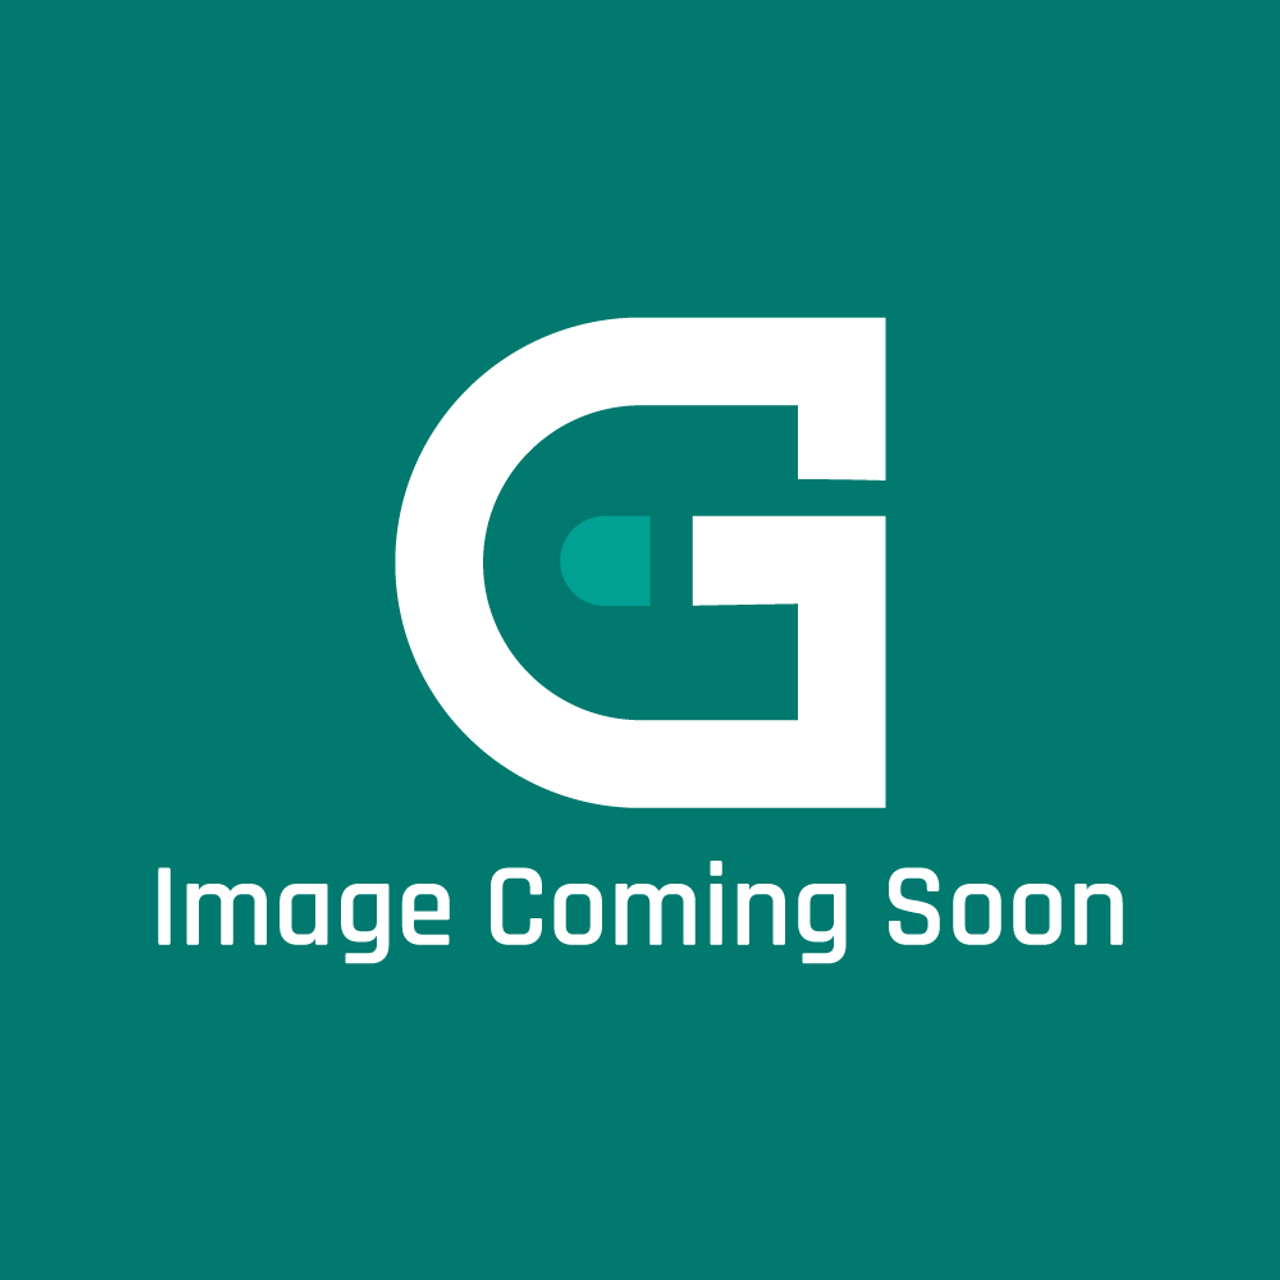 Fisher & Paykel 534250 - Trivet Gs Assy - Image Coming Soon!